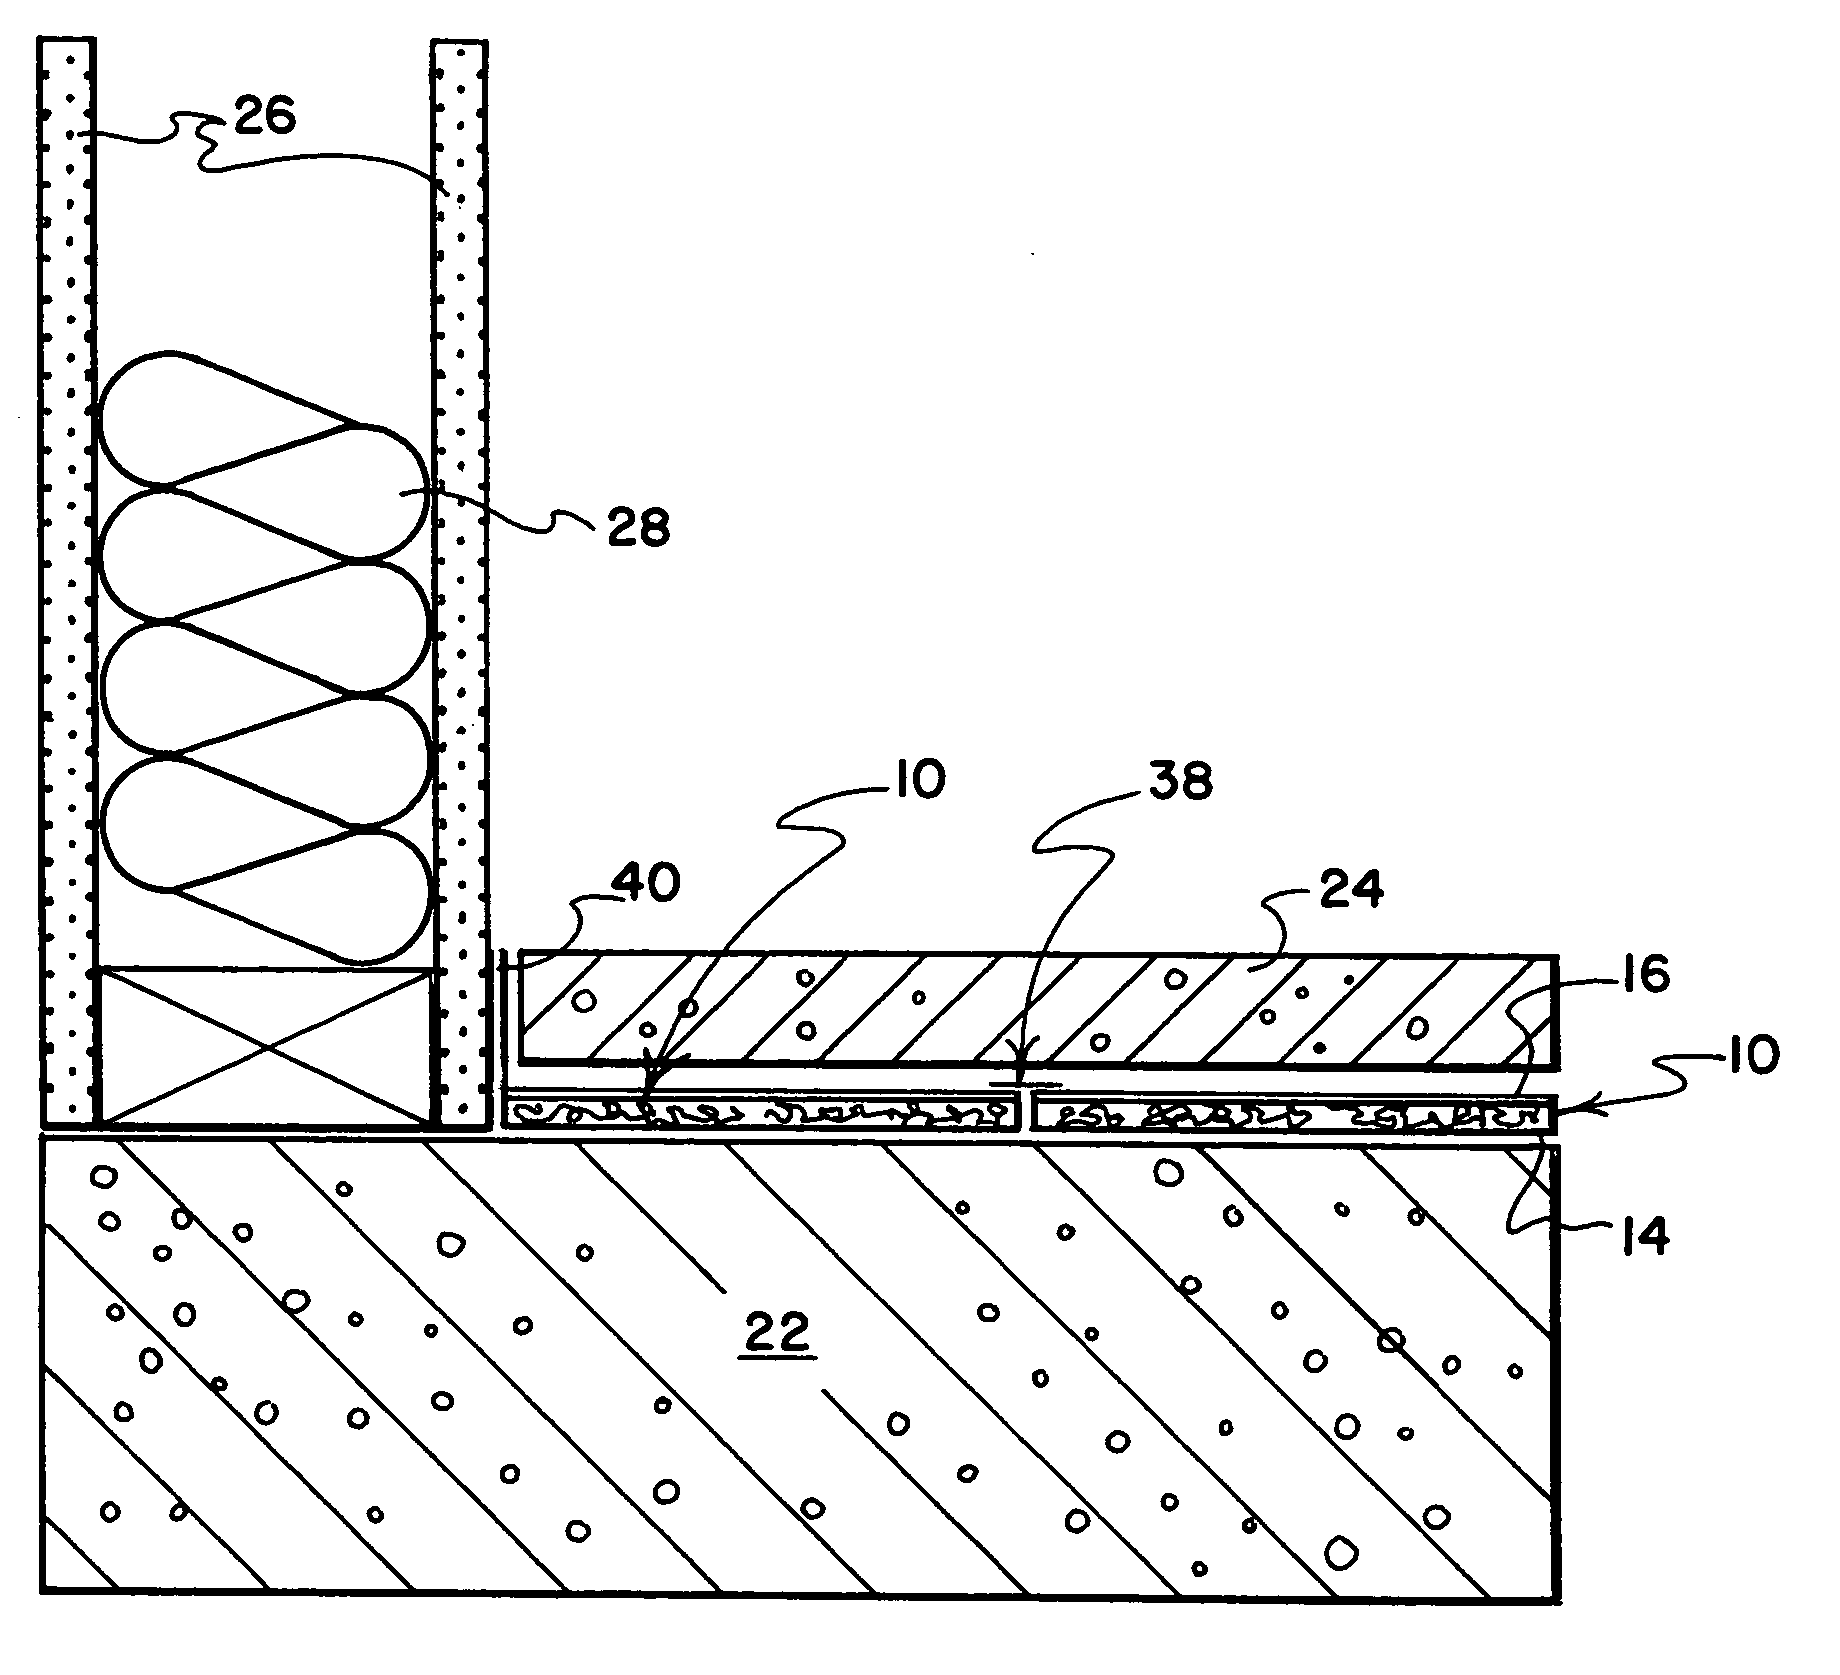 Composite tangled filament mat with overlying liquid moisture barrier for cushioning and venting of vapor, and for protection of underlying subfloor